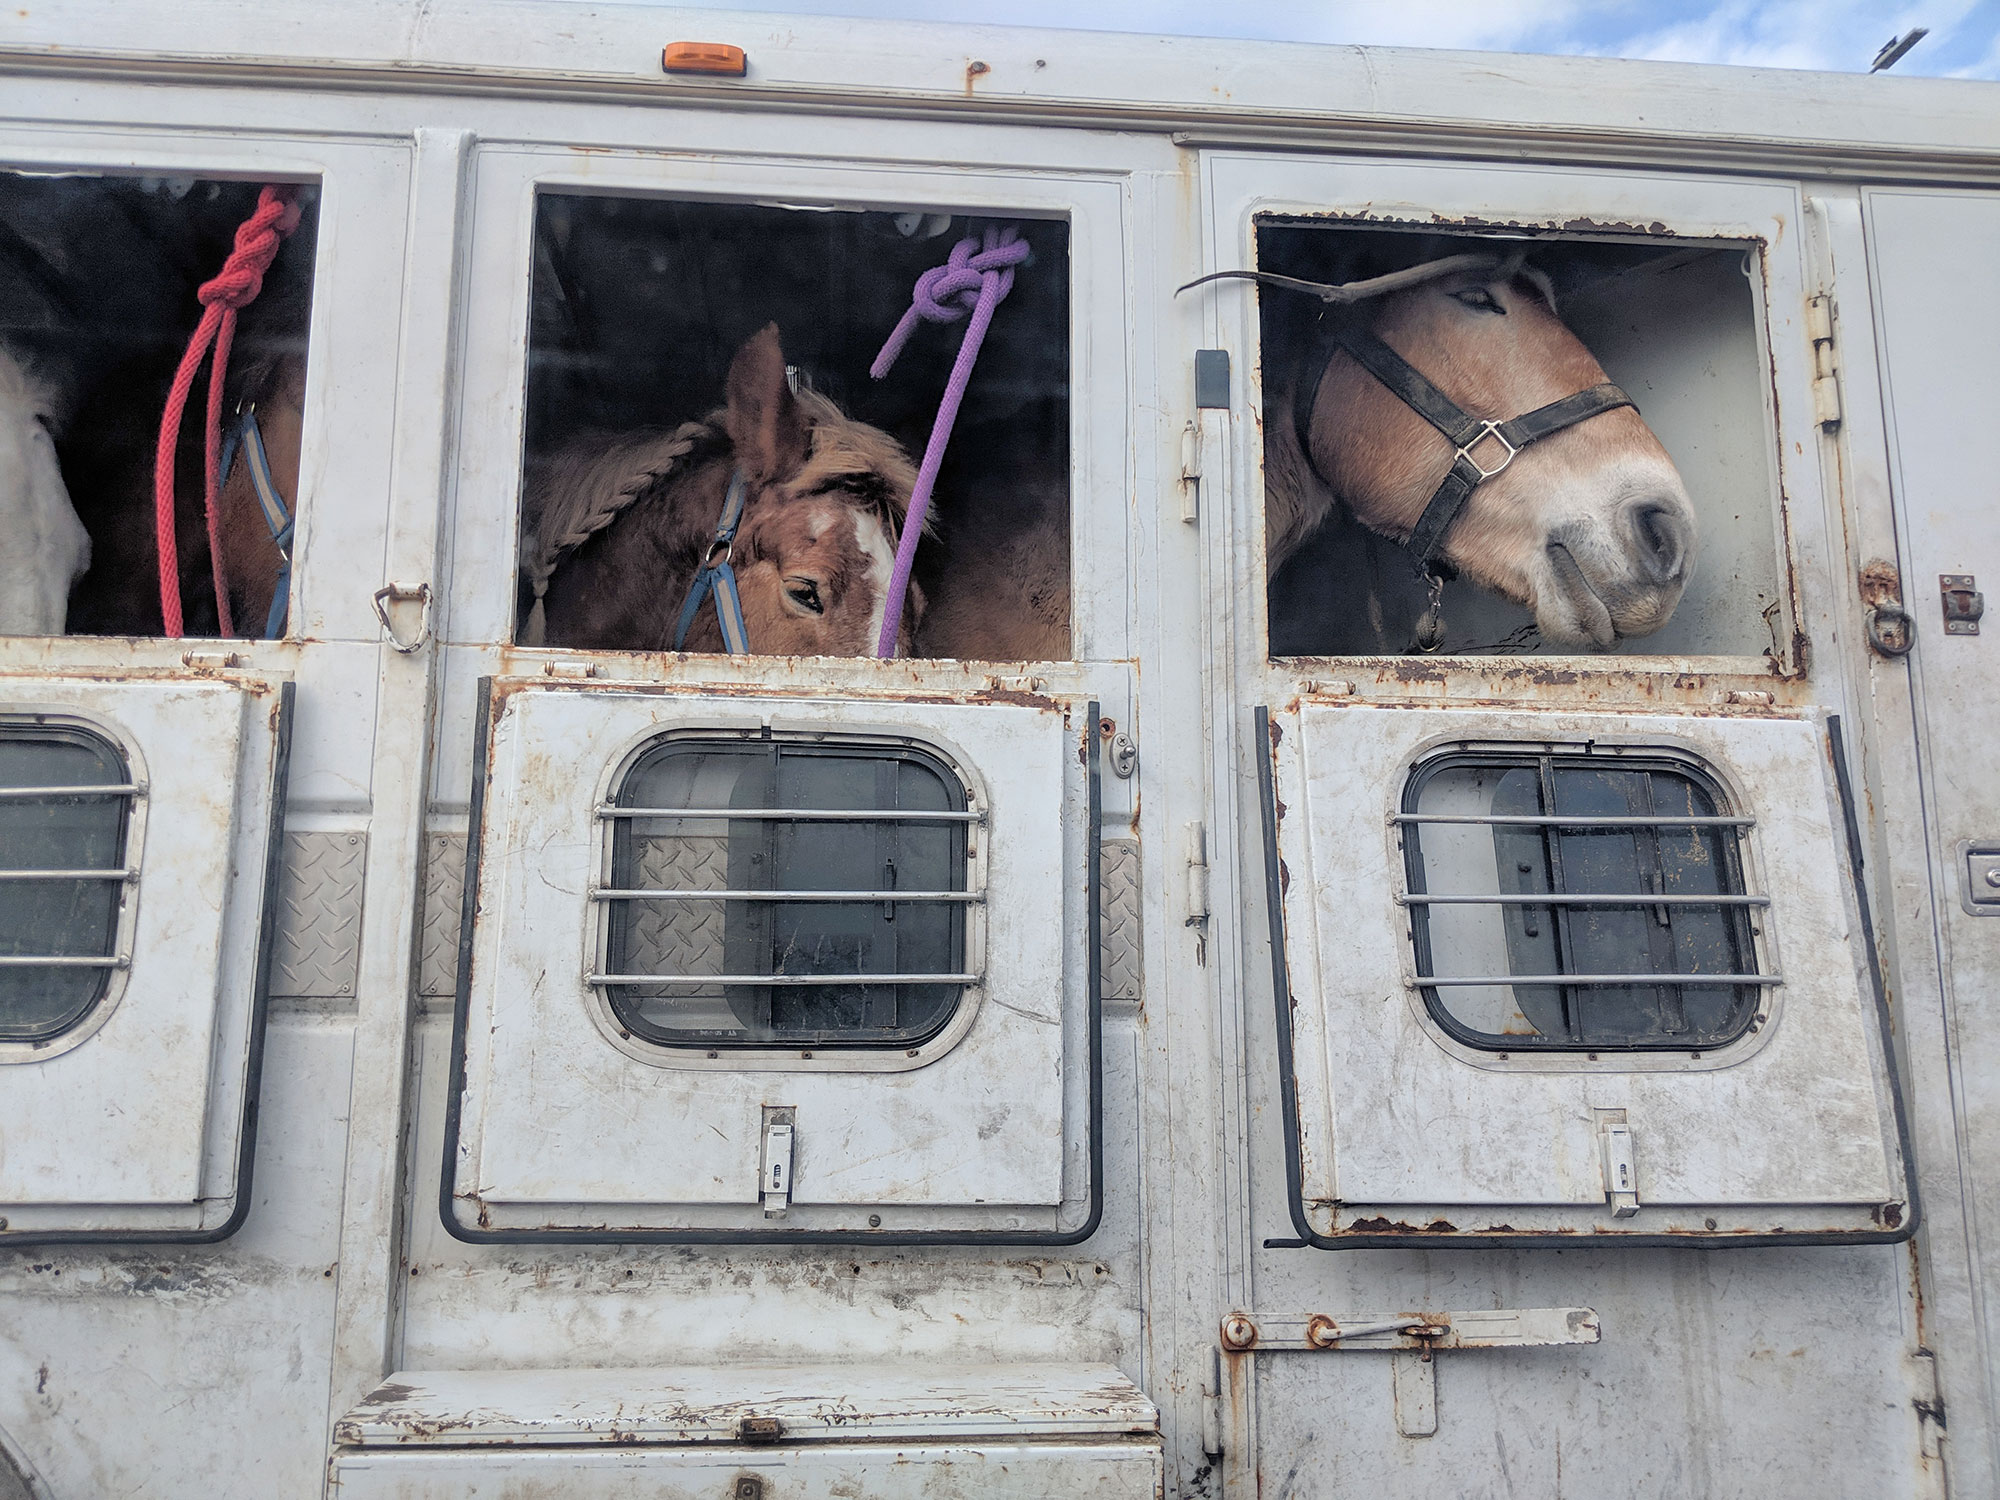 These horses were next to my Uber on the highway from the airport.